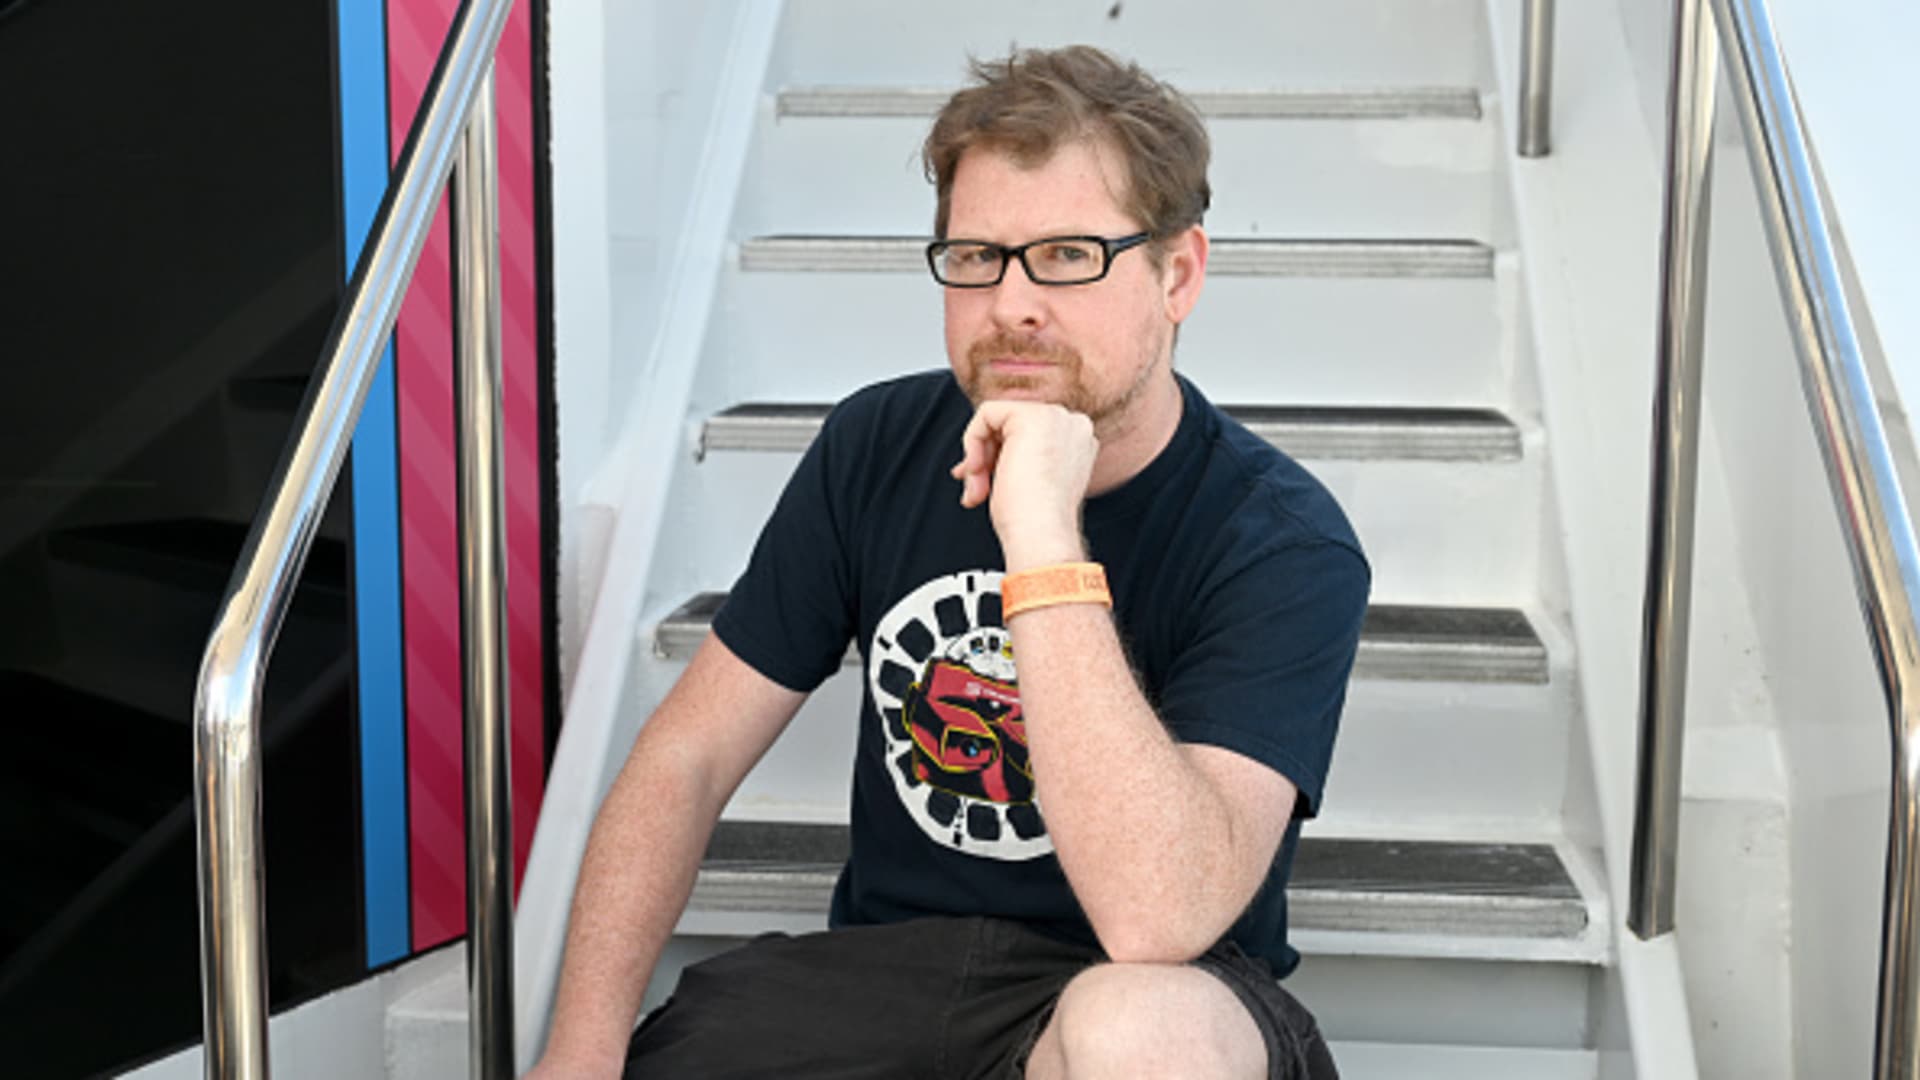 How Justin Roiland used his ‘Rick and Morty’ fame to pursue young fans, text messages show